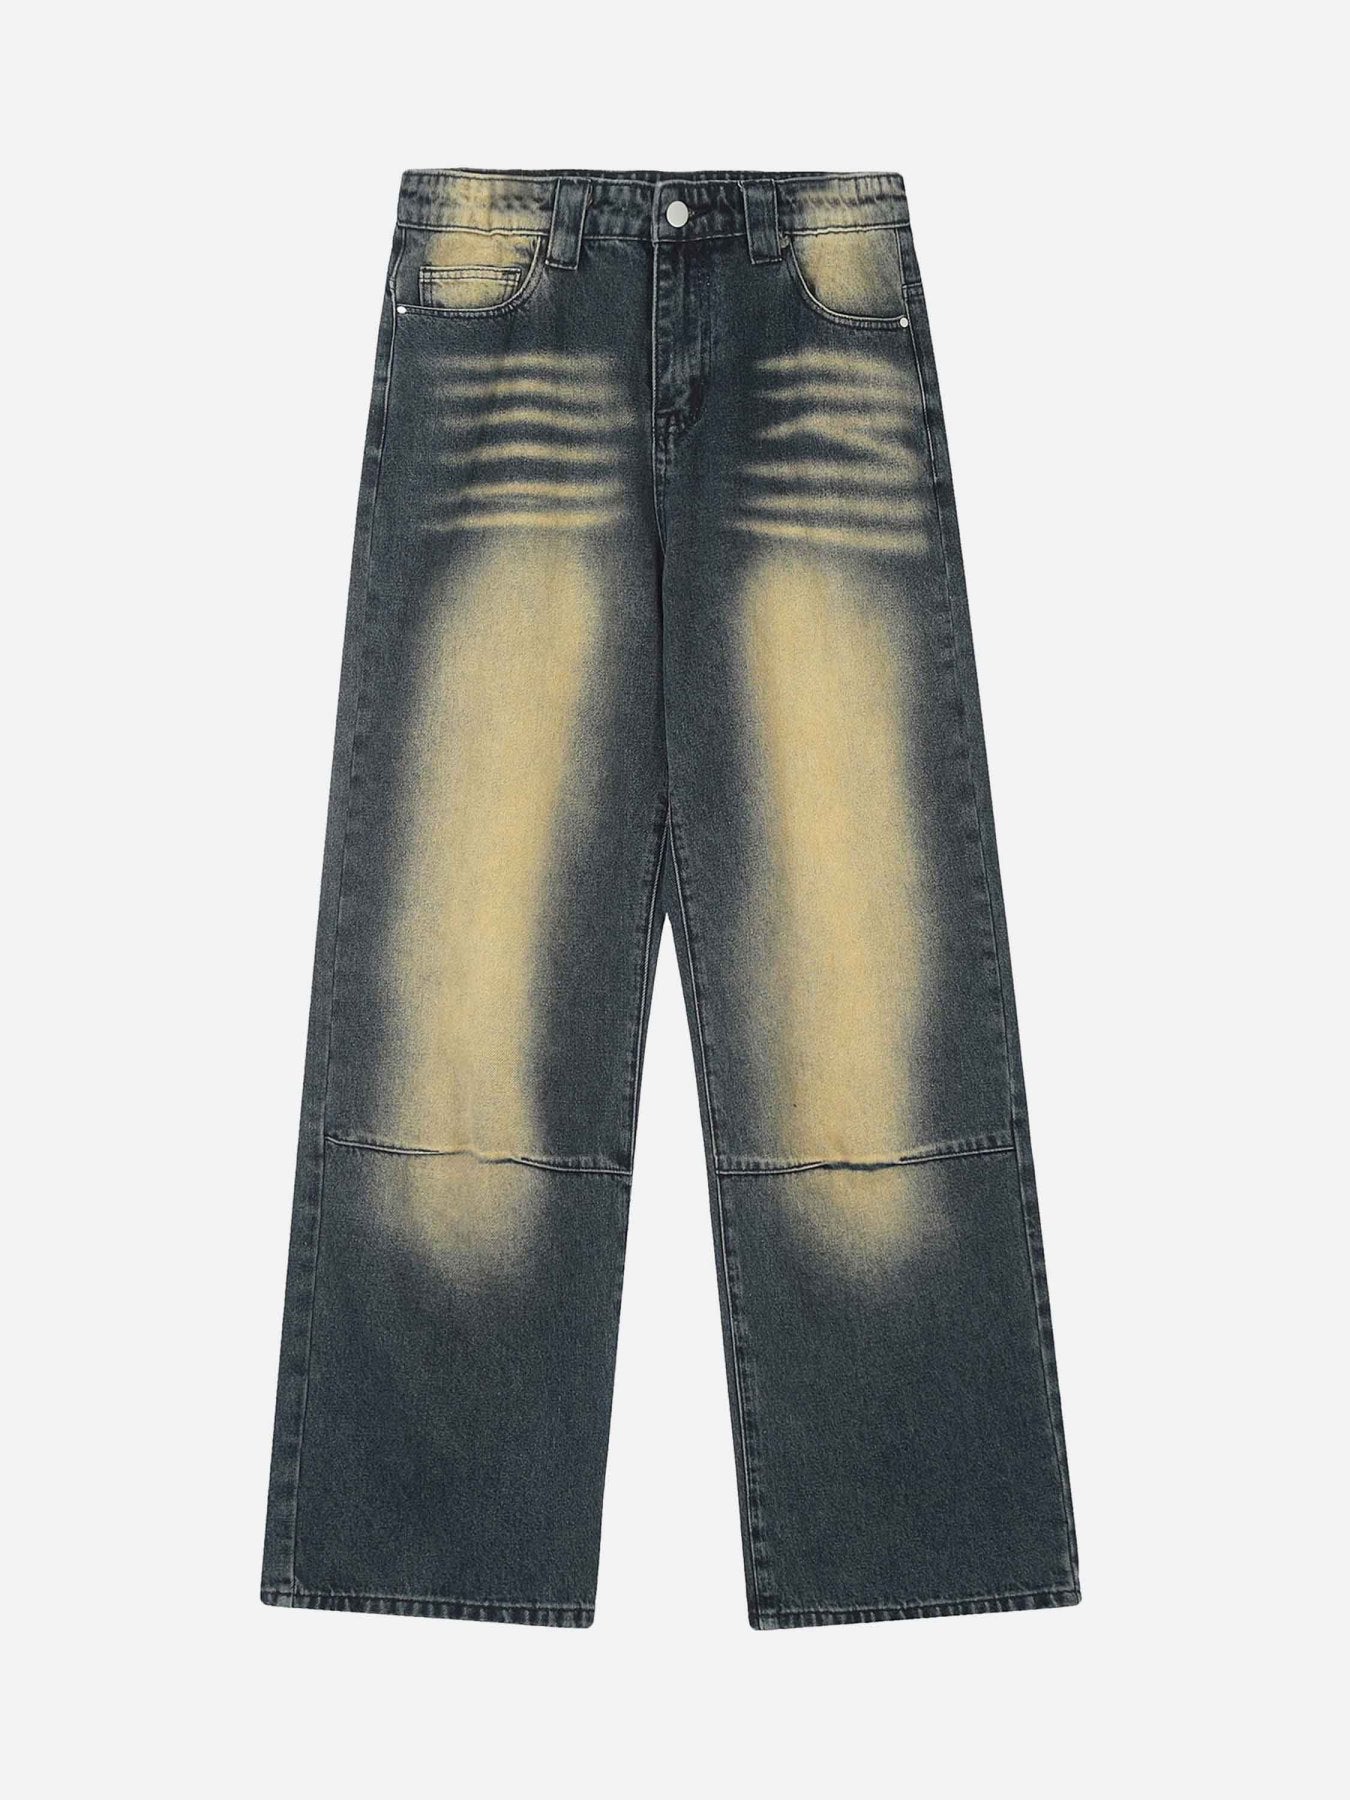 Thesupermade American Gothic Letter Embroidered Jeans - 1936